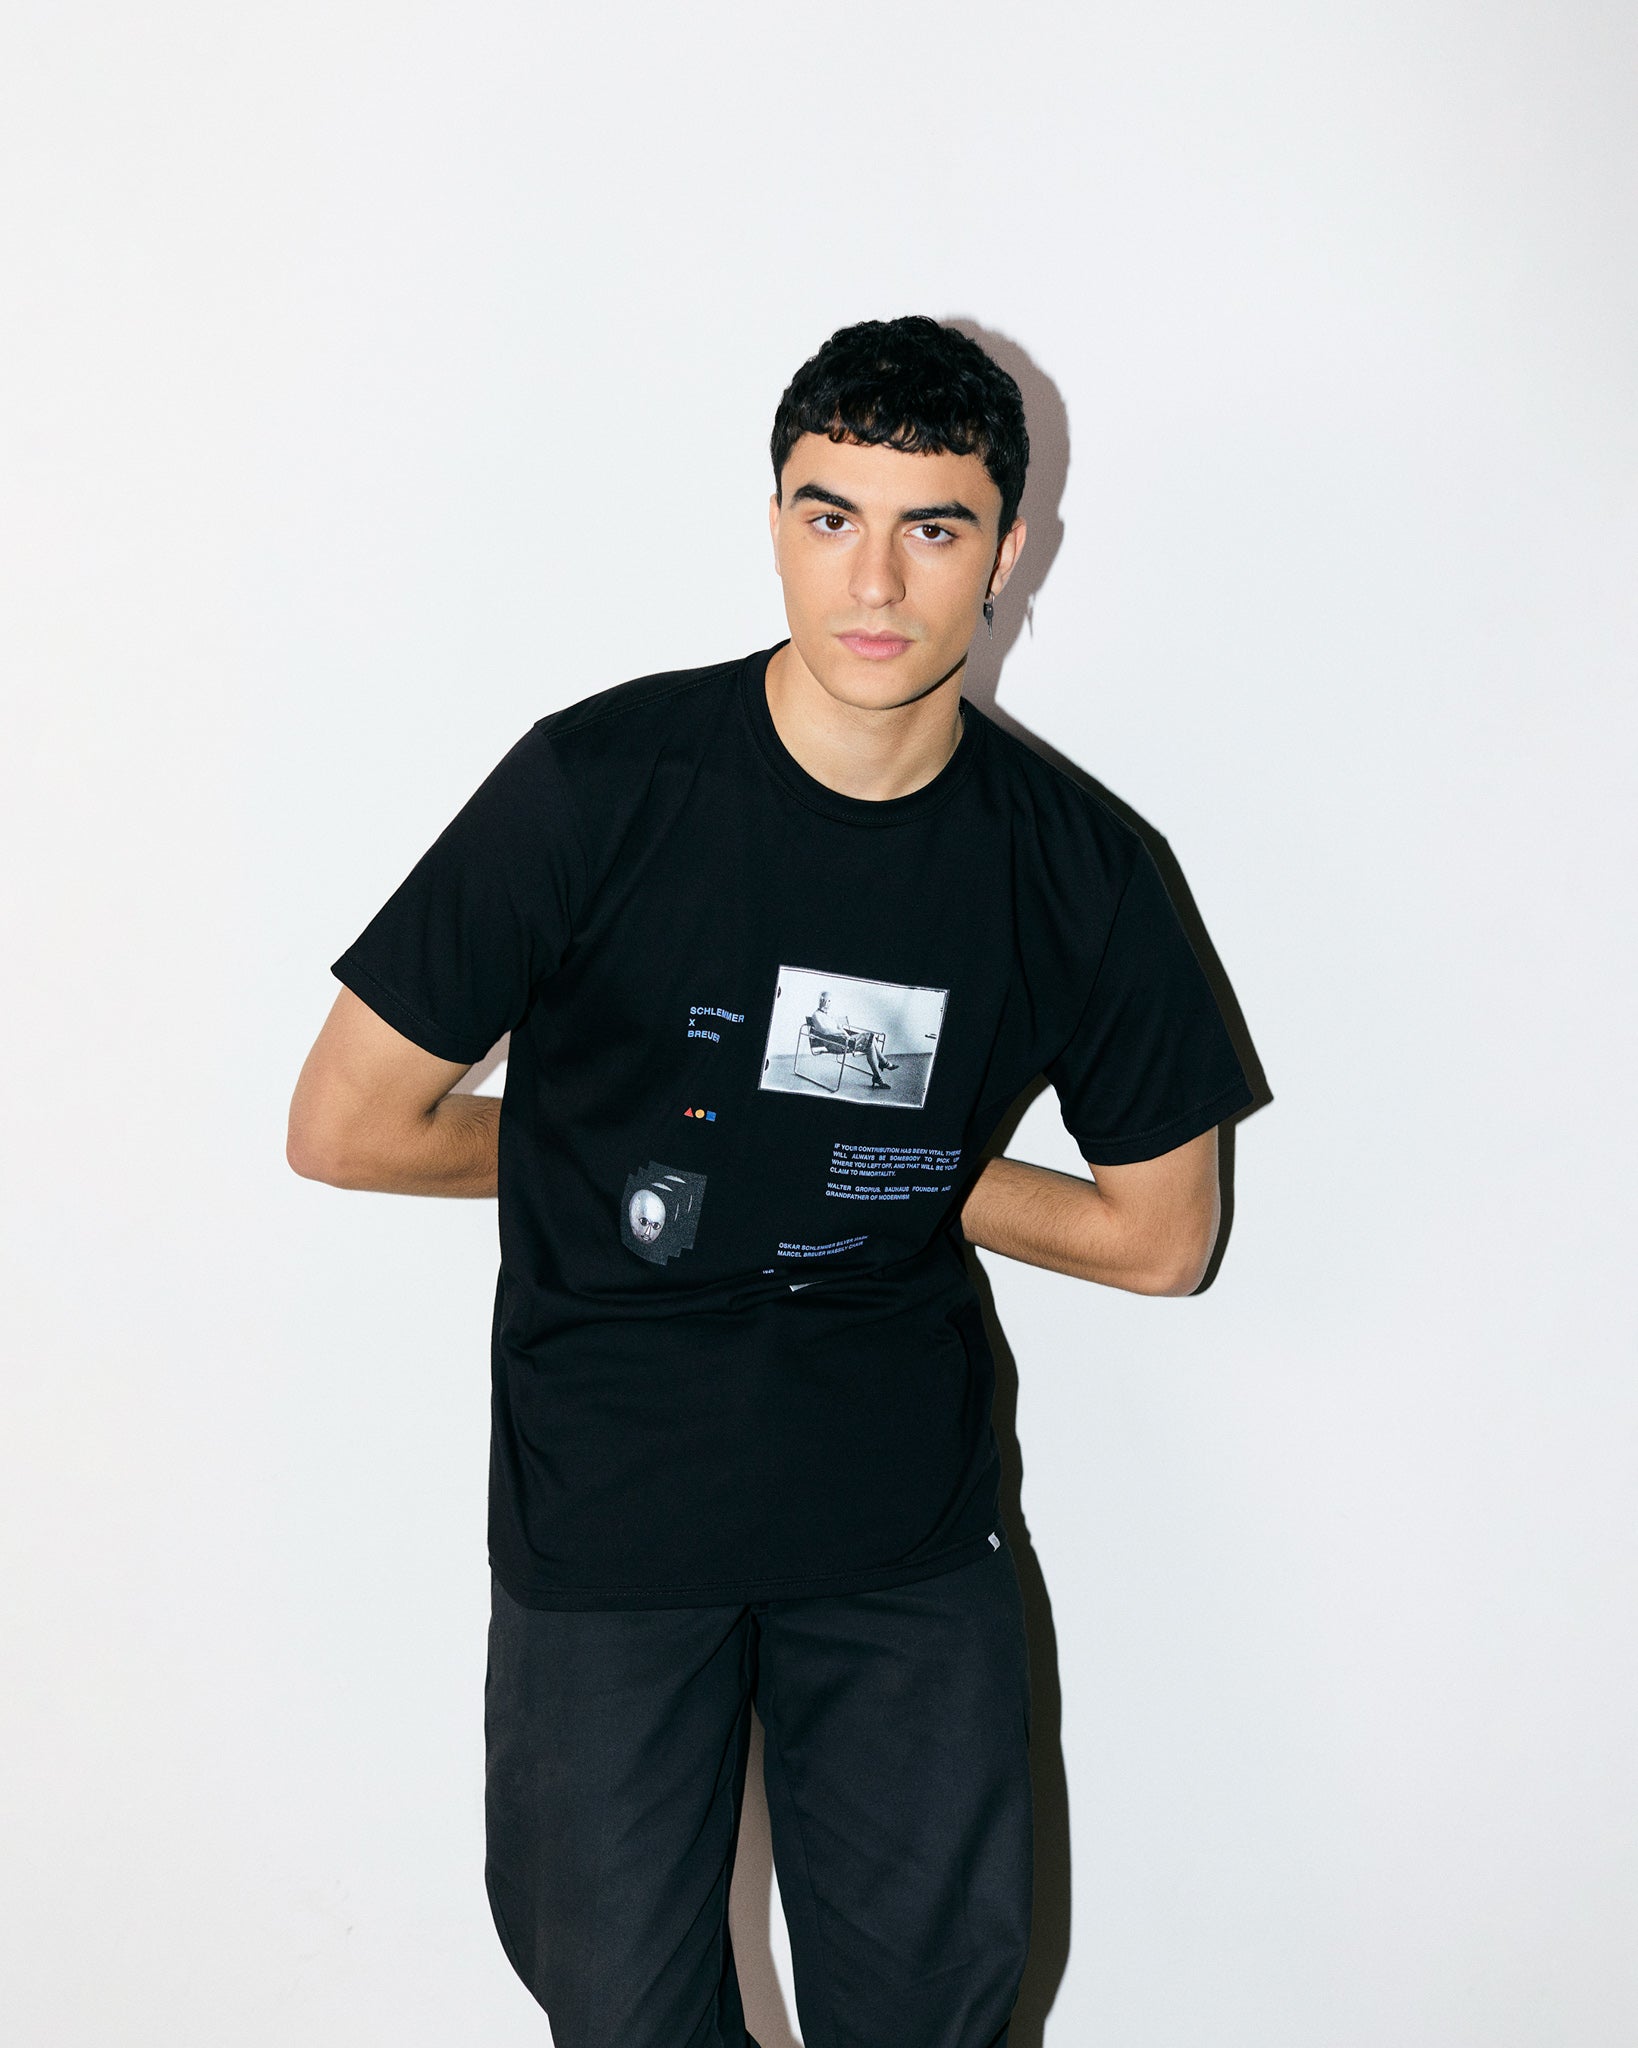 Arjang Mahdavi wears Black  Organic Short Sleeve 100% Cotton Tee with graphic print of Marcel Breuer’s B3 Chair and theatrical mask by Oskar Schlemmer and quote from Walter Gropius from the Bauhaus Collection. 